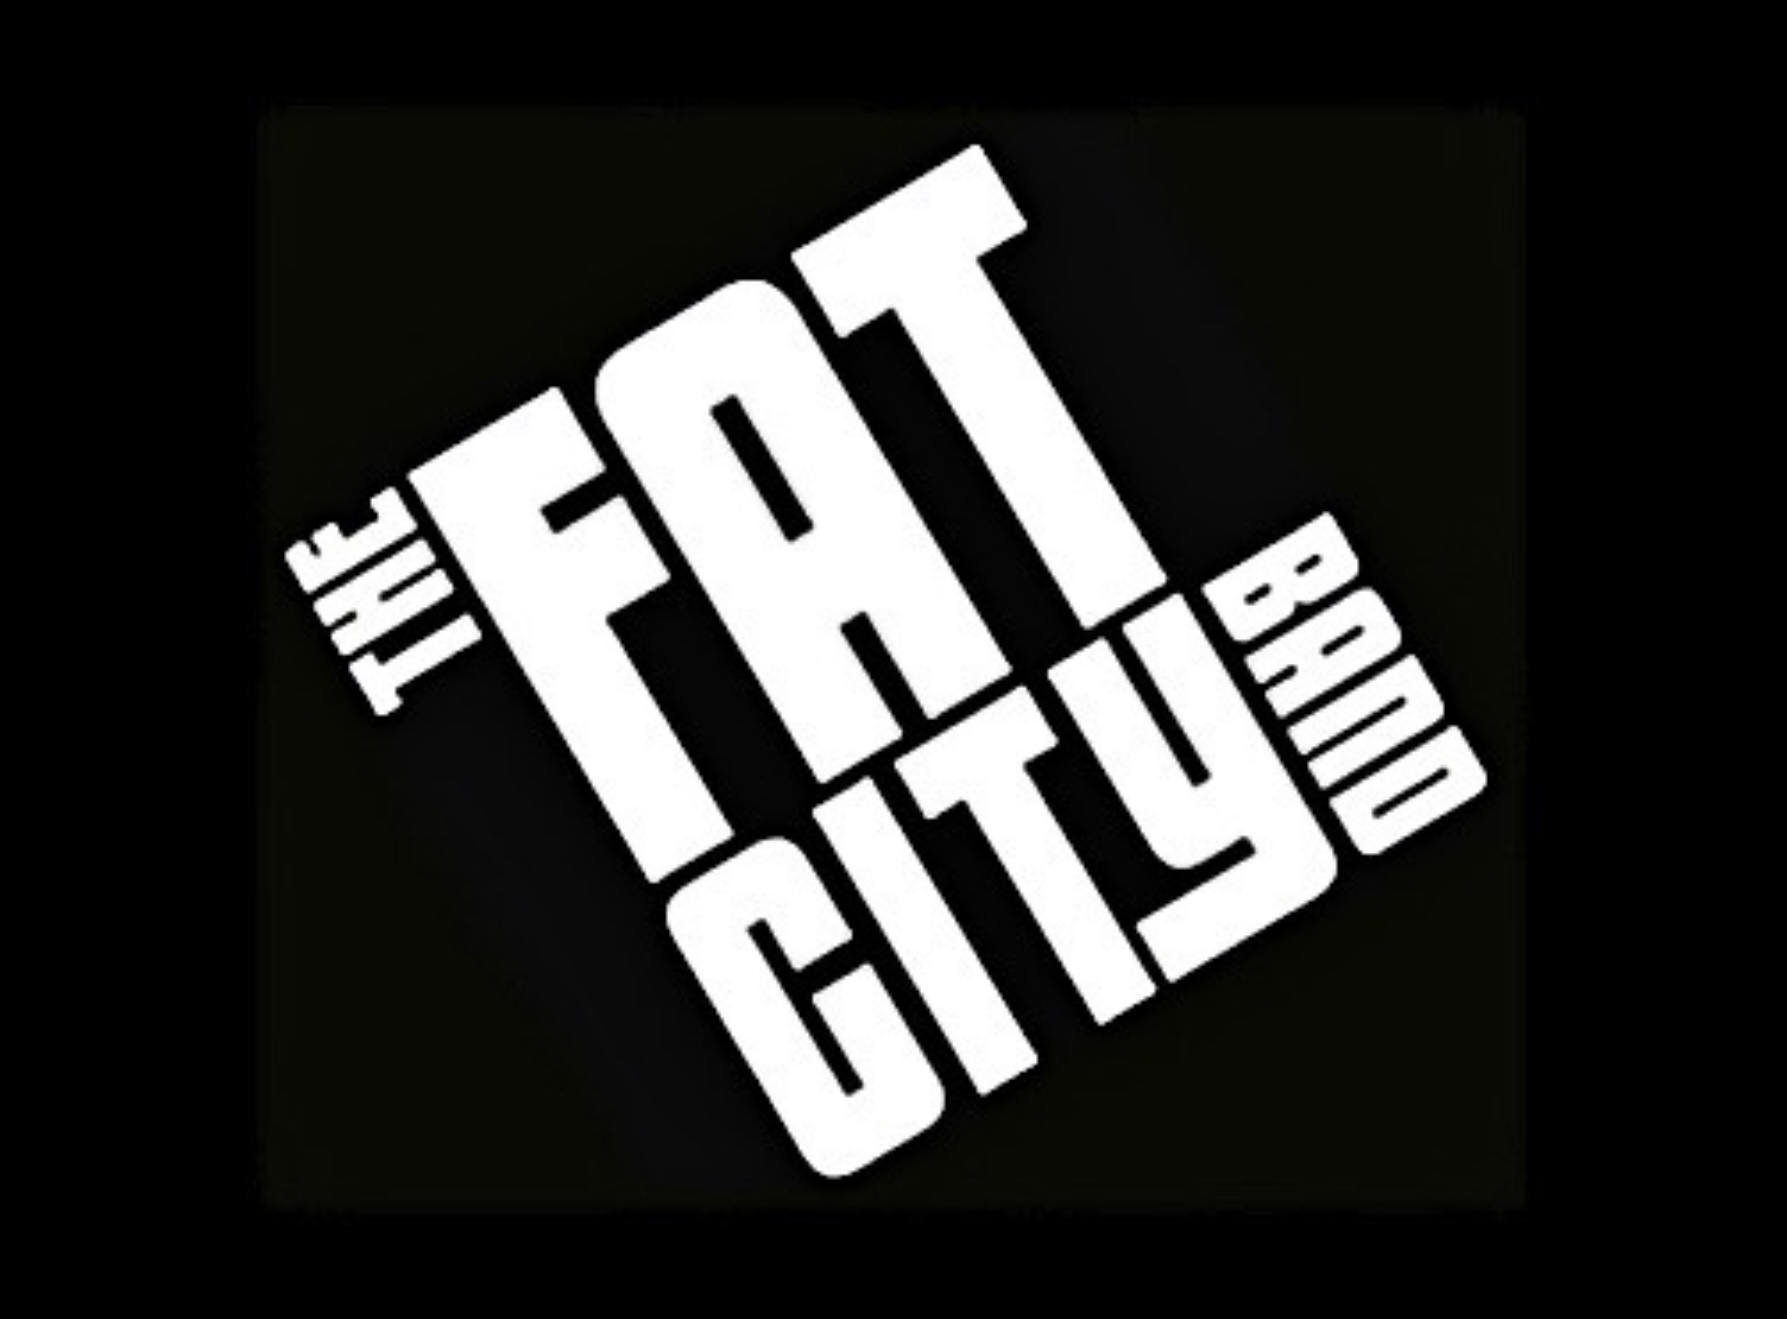 The Fat City Band